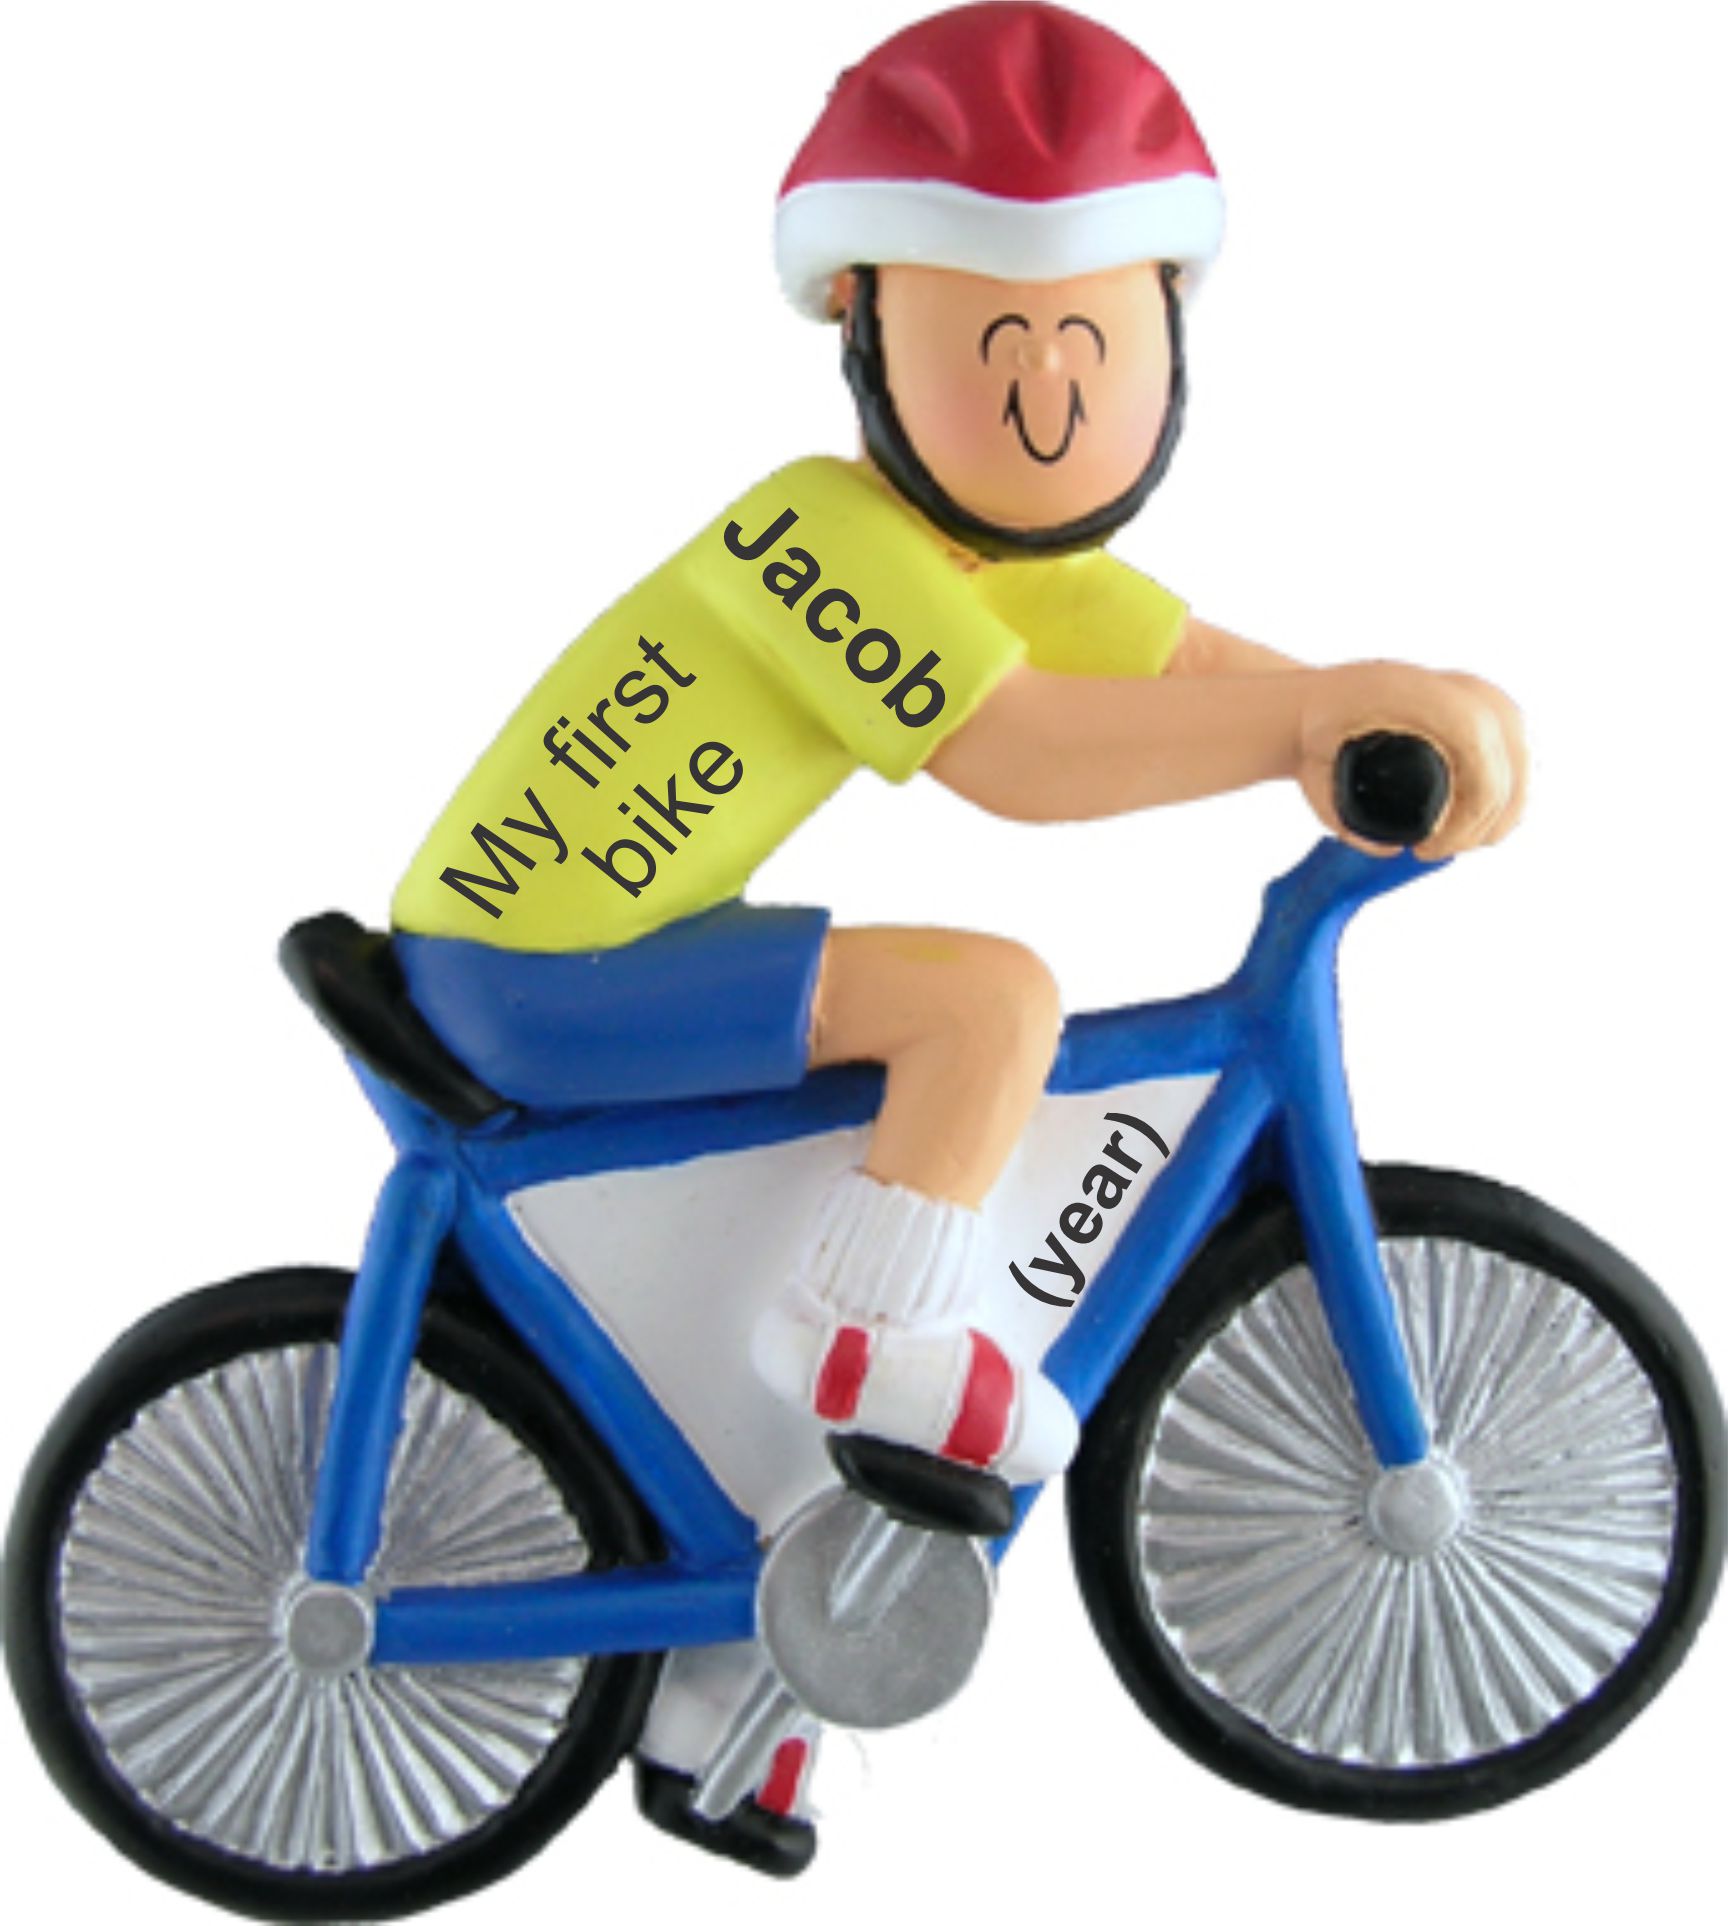 My First Bike Male Christmas Ornament Personalized by RussellRhodes.com